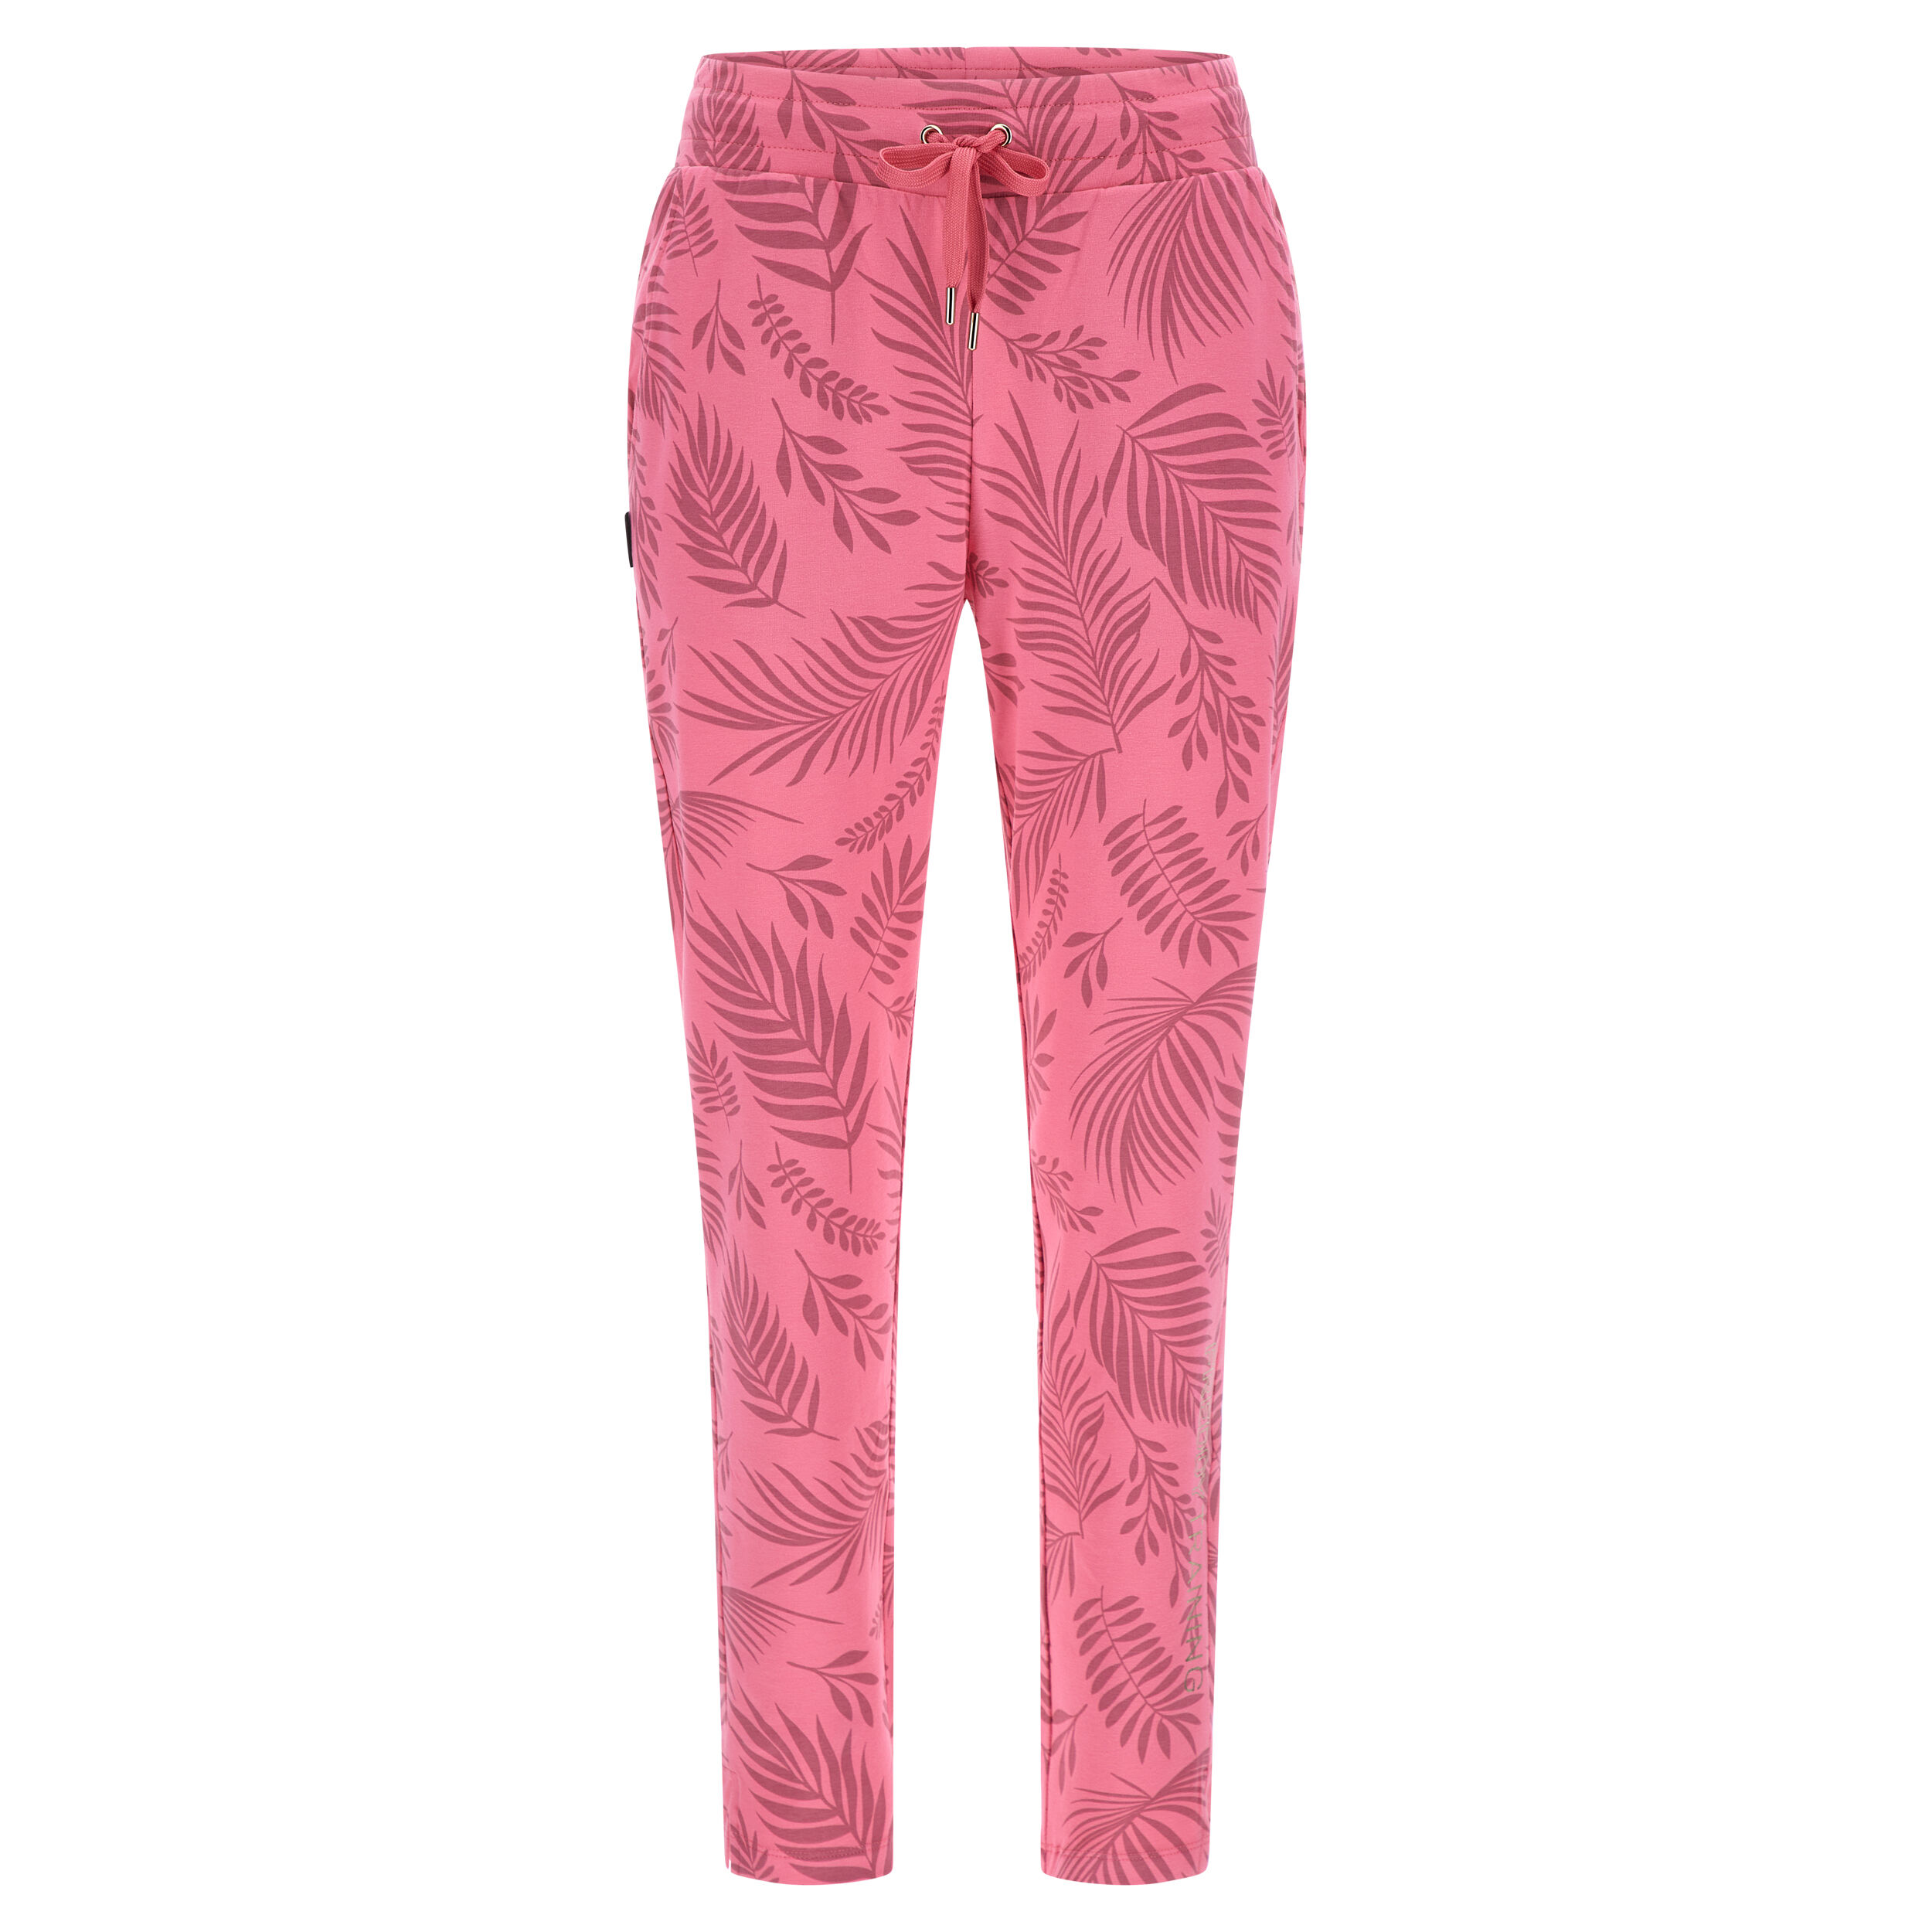 Freddy Pantaloni sportivi con stampa tropicale all over Allover Leaves Pink Donna Extra Small